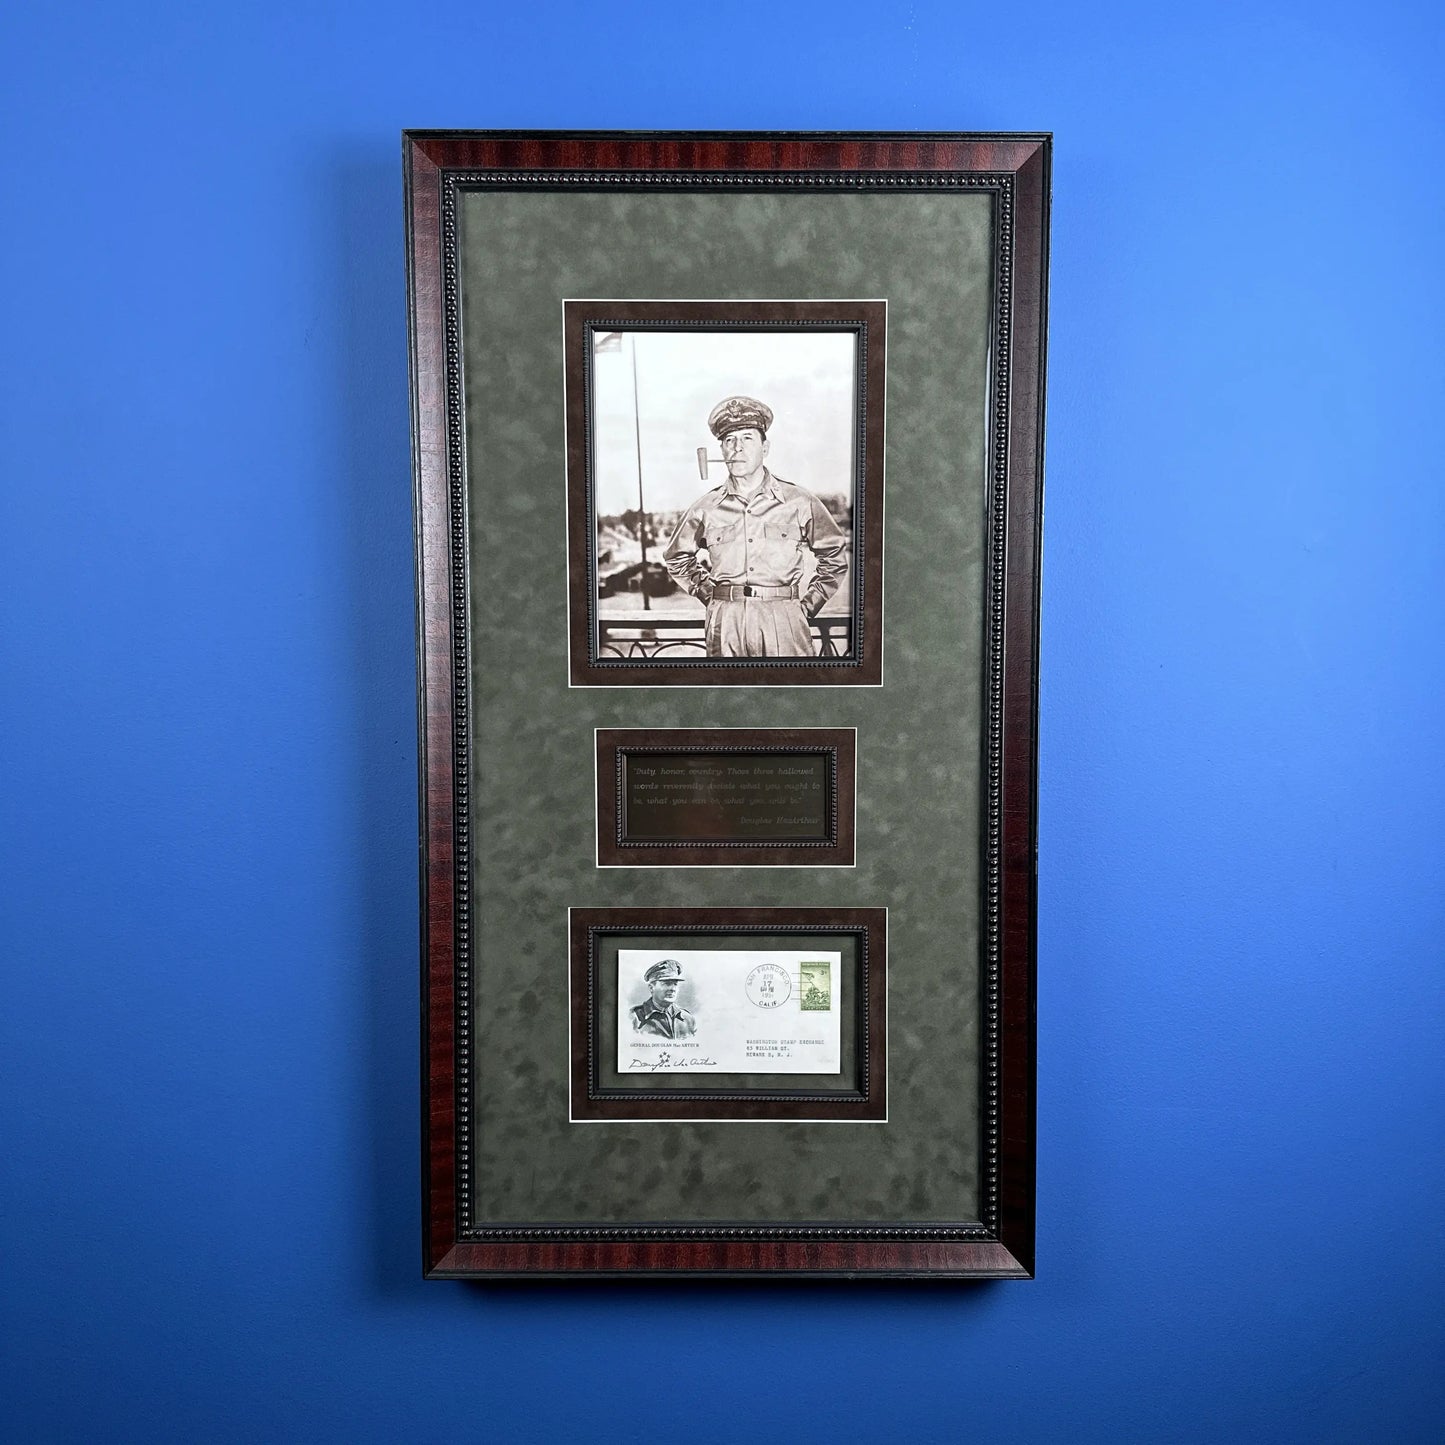 General Douglas MacArthur - Framed with signature - "Duty, honor, country . . ."